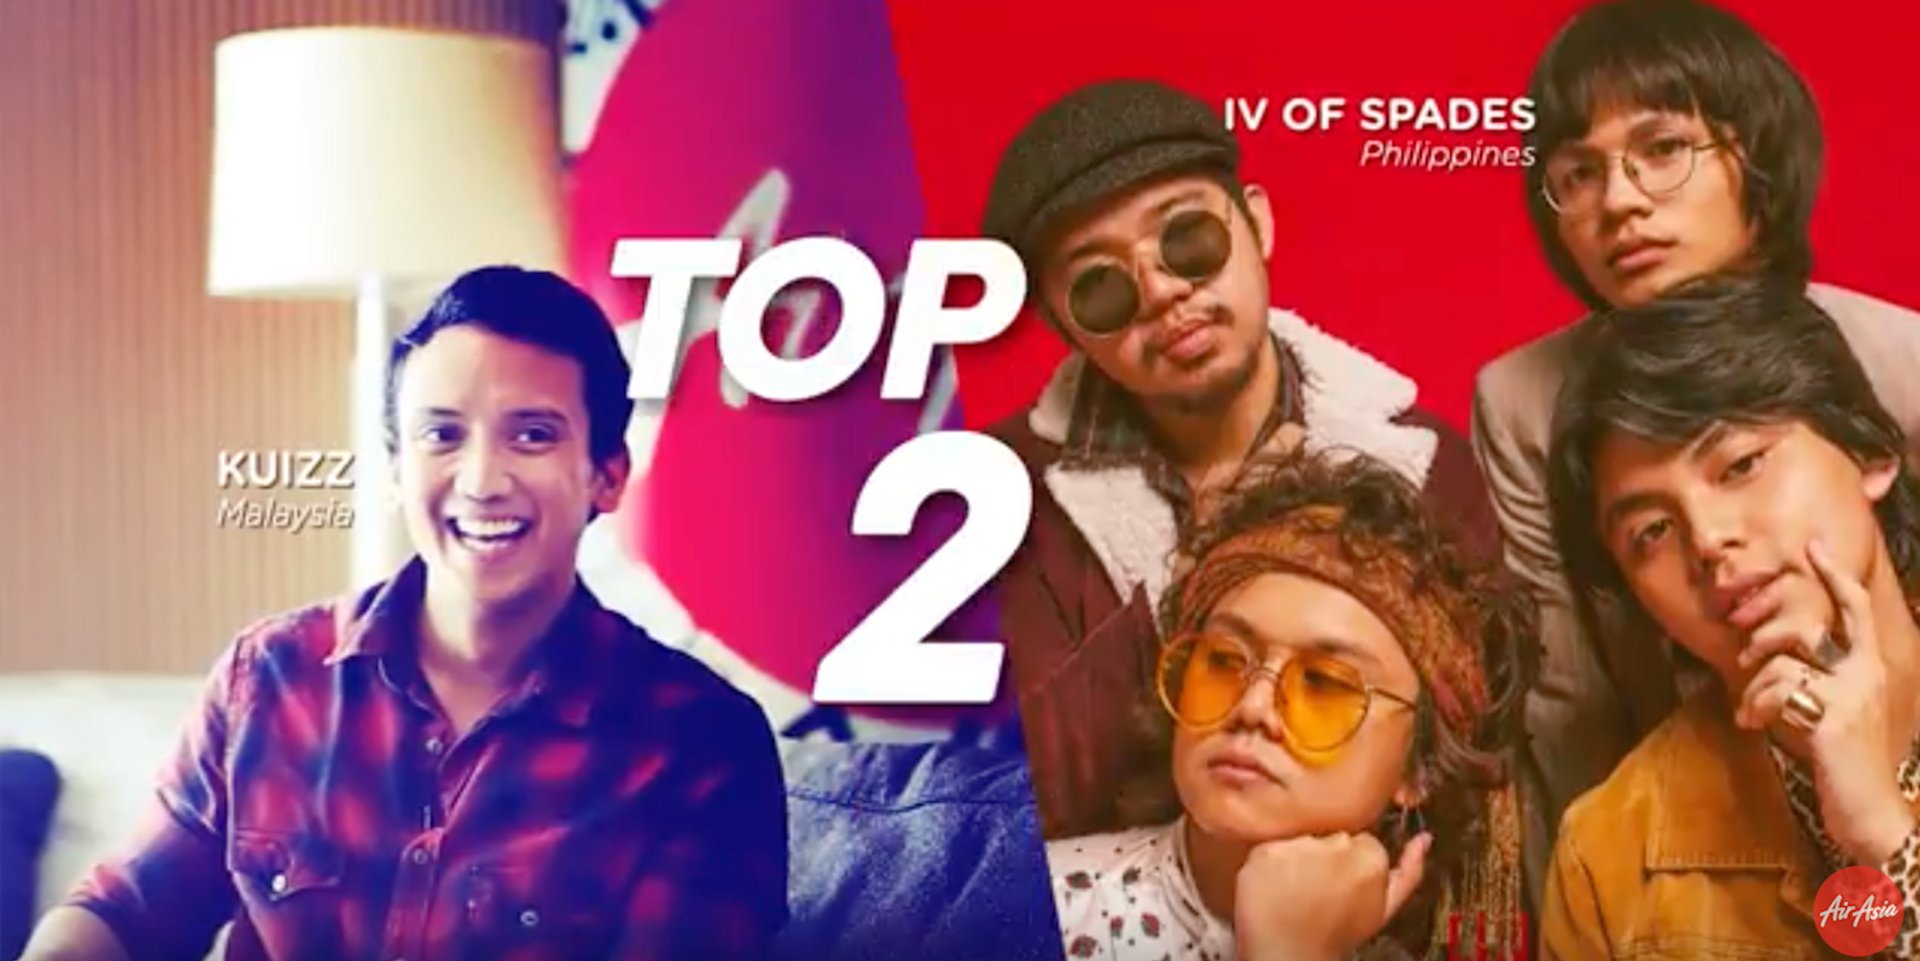 IV of Spades and Kuizz to battle it out on final round of Dreams Come True with AirAsia